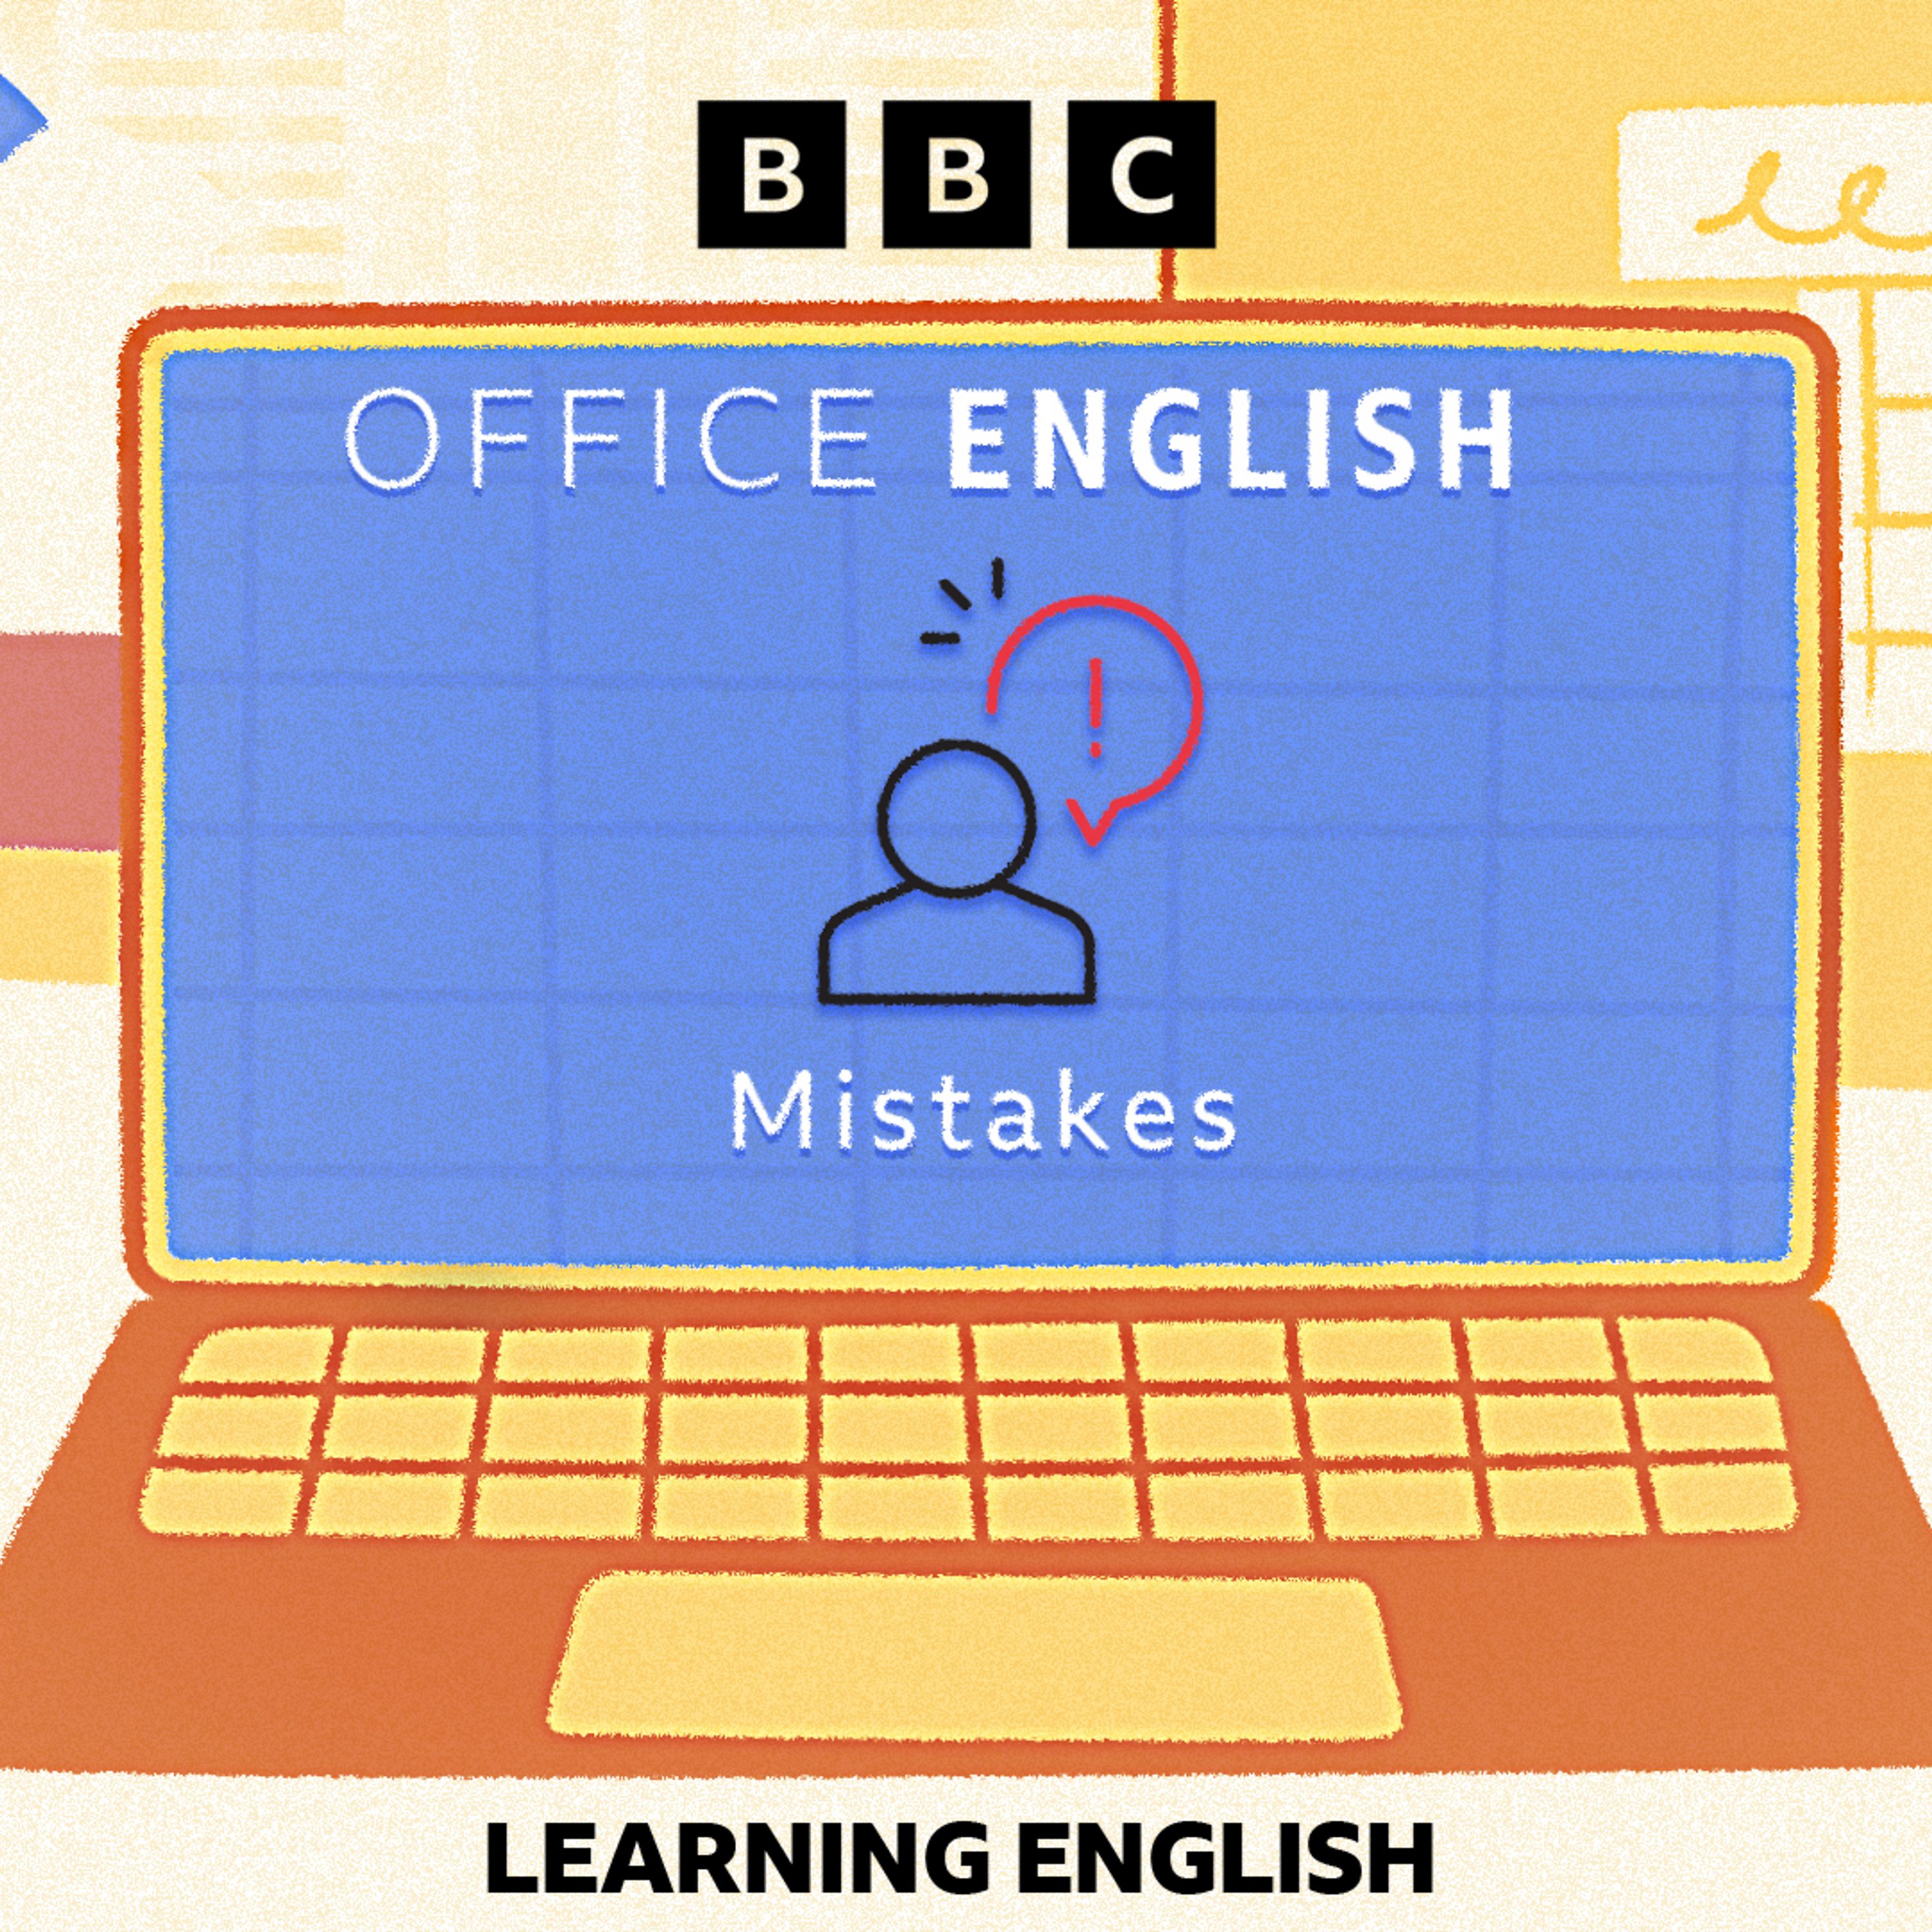 Office English: Mistakes